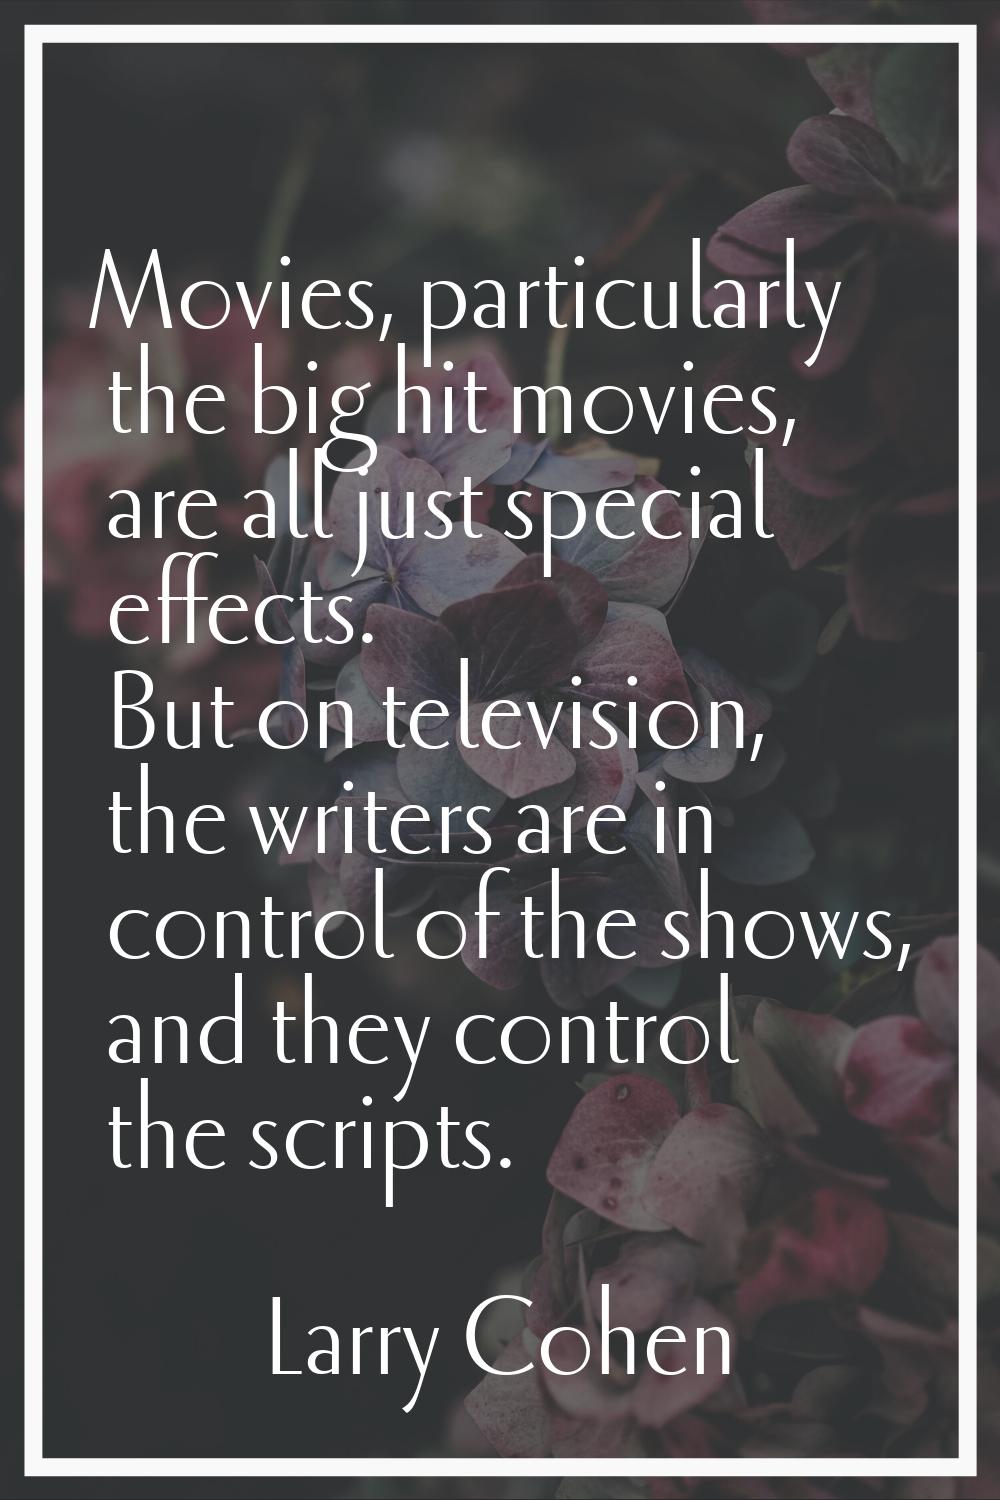 Movies, particularly the big hit movies, are all just special effects. But on television, the write